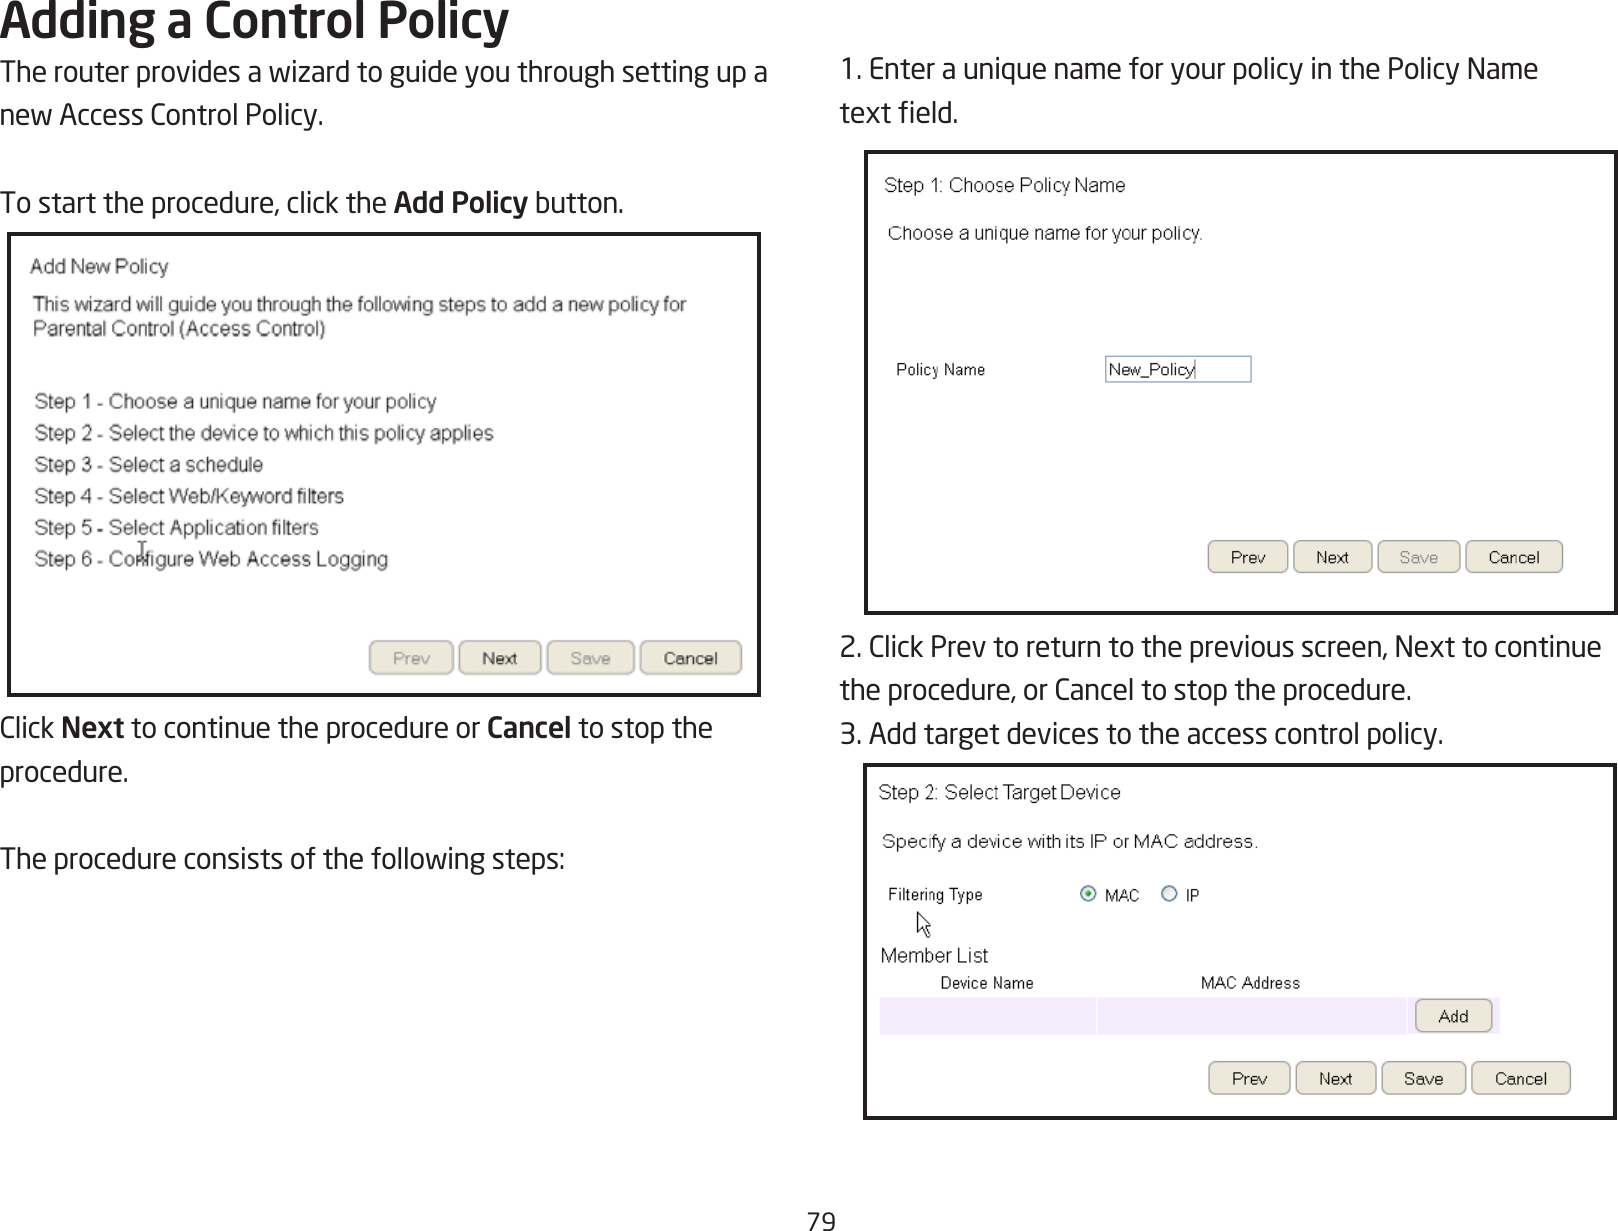 79Adding a Control PolicyTherouterprovidesawizardtoguideyouthroughsettingupanewAccessControlPolicy.To start the procedure, click the Add Policybutton.ClickNext to continue the procedure or Cancel to stop theprocedure.Theprocedureconsistsofthefollowingsteps:1.EnterauniquenameforyourpolicyinthePolicyNametexteld.2.ClickPrevtoreturntothepreviousscreen,Nexttocontinuetheprocedure,orCanceltostoptheprocedure.3. Add target devices to the access control policy.